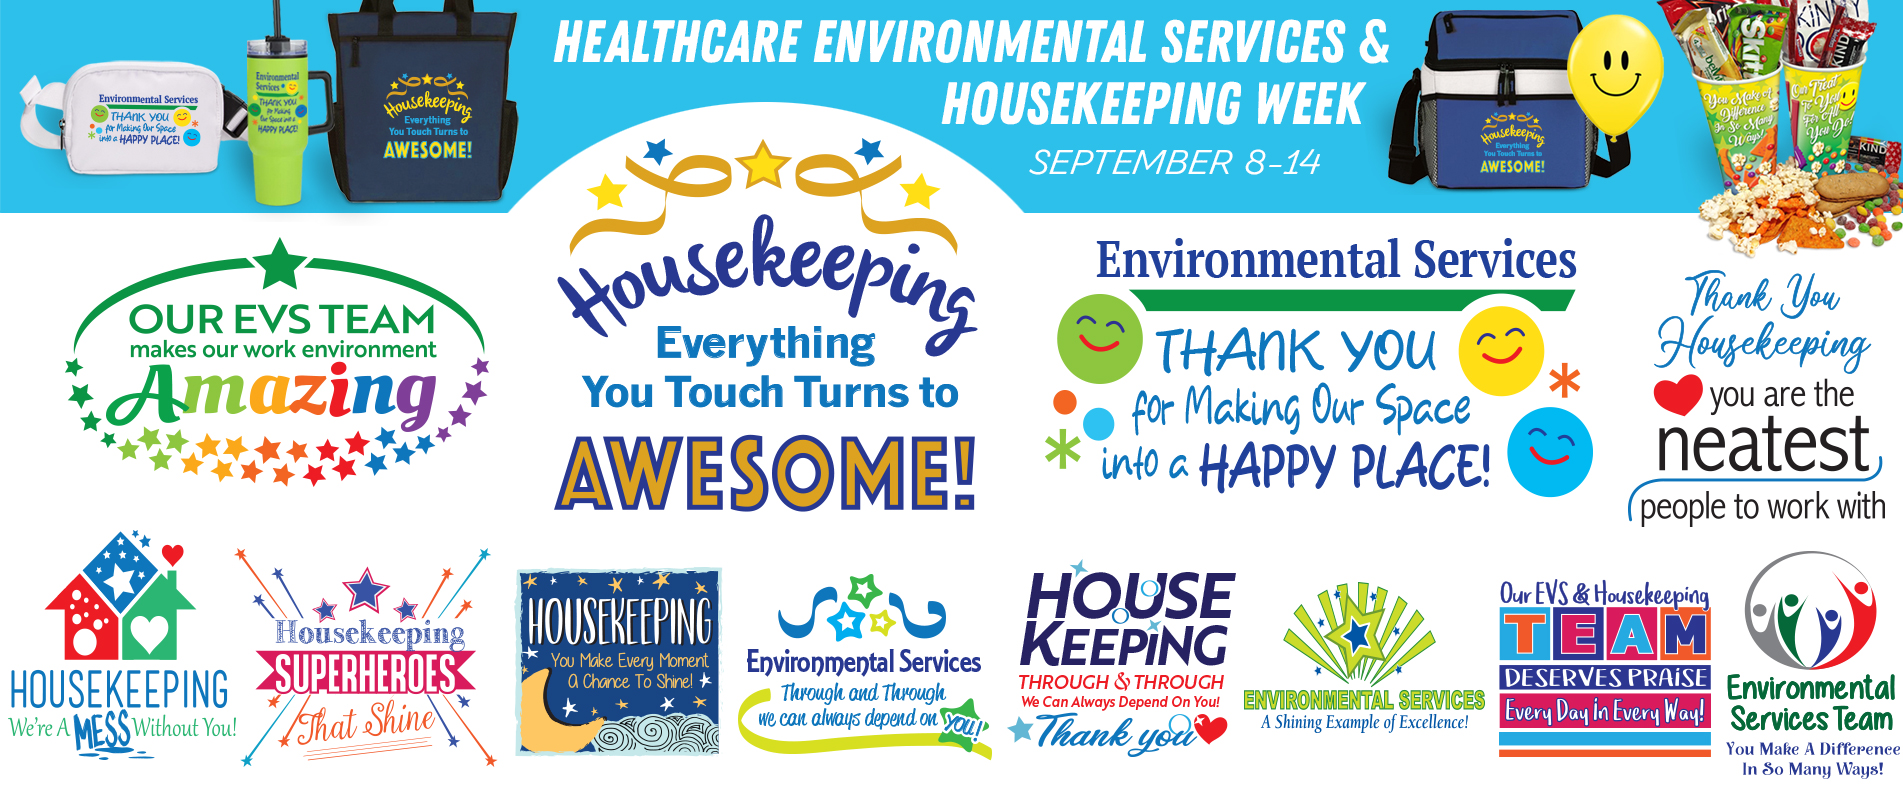 Healthcare Environmental Services & Housekeeping Appreciation Week Theme Slogans 2018 | Care Promotions